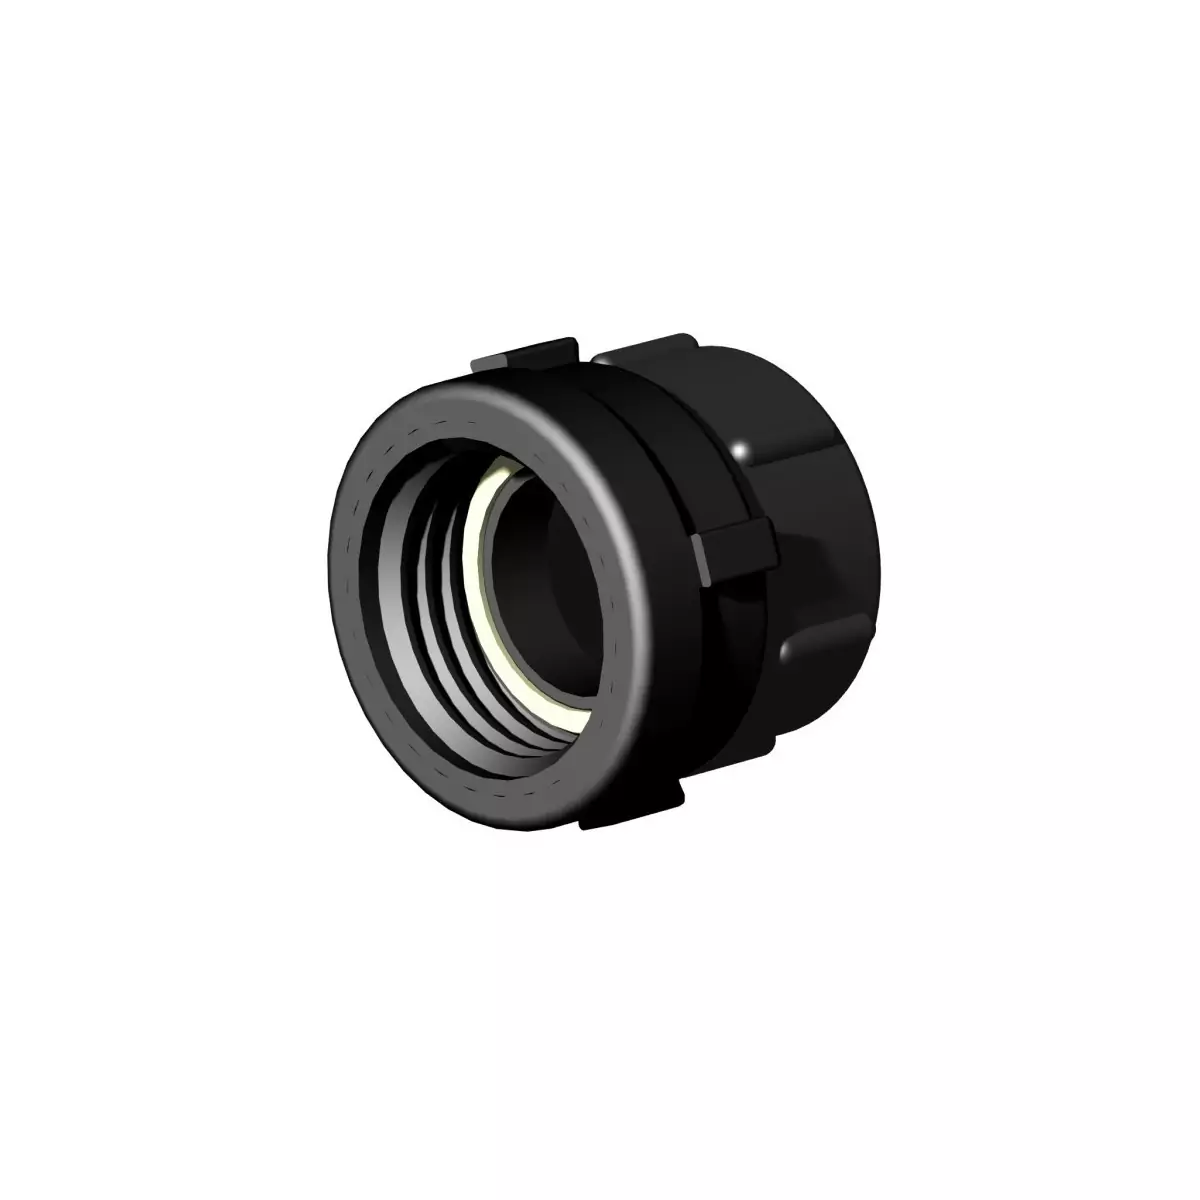 Product sheet Female connector S60x6 2 "- female gas thread 2"